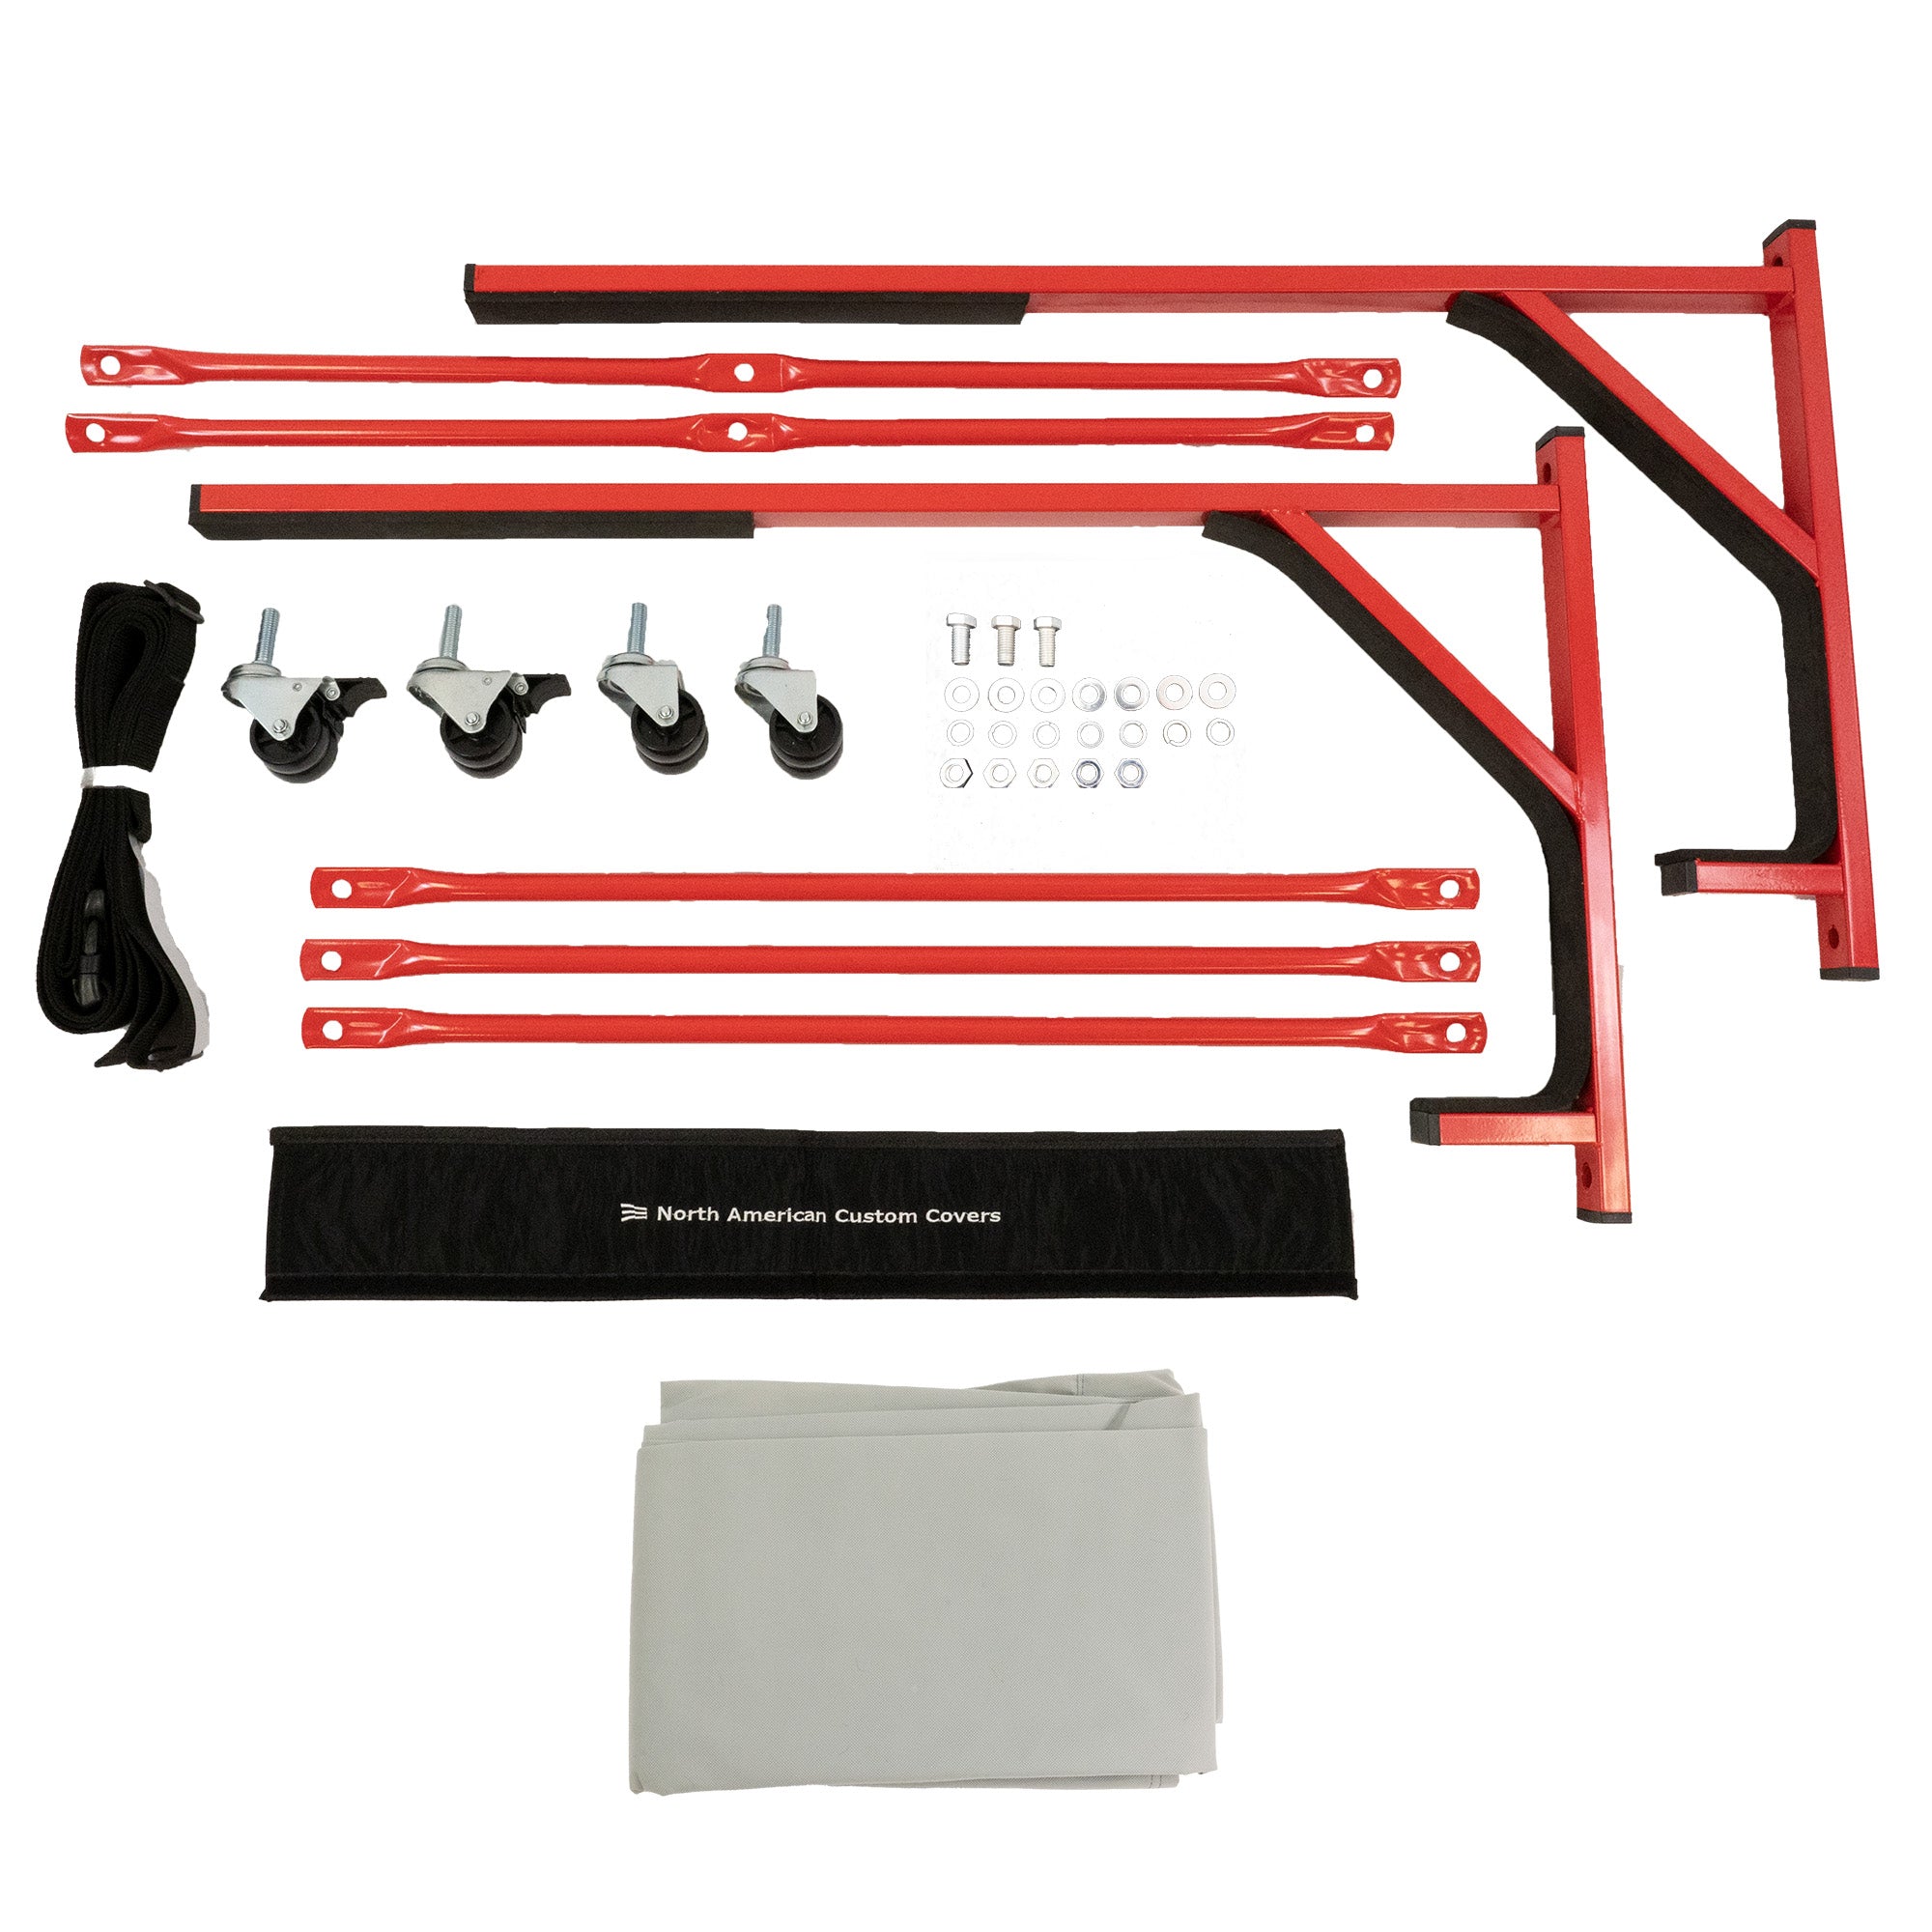 BMW E46 3 Series Heavy-duty Hardtop Stand Trolley Cart Rack (Red) with Securing Harness and Hard Top Dust Cover (050R)